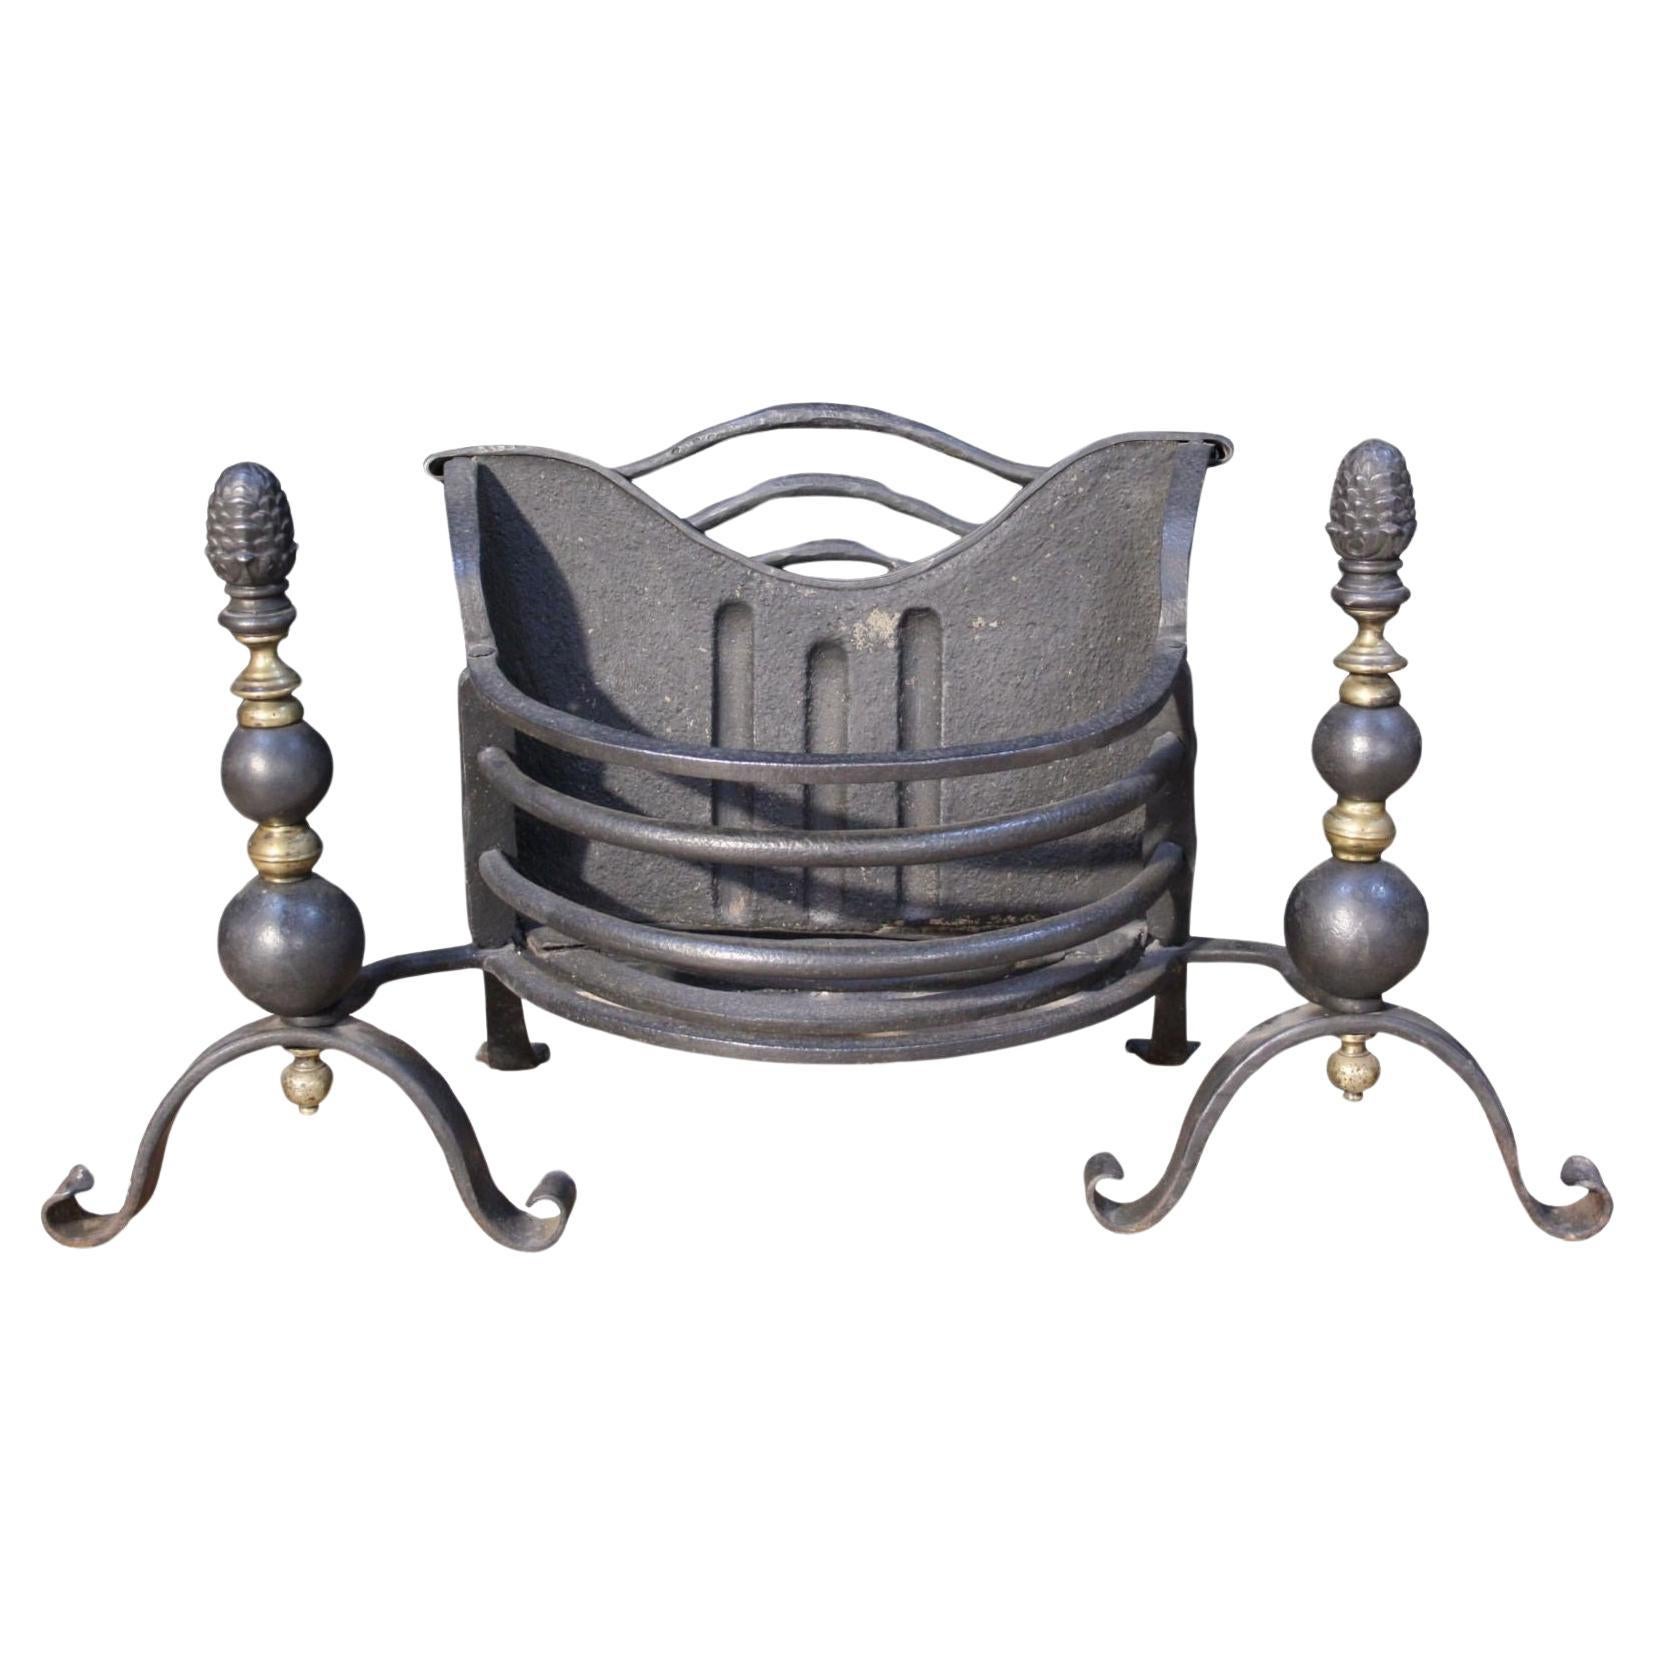 An Antique Wrought Iron Fire Grate For Sale